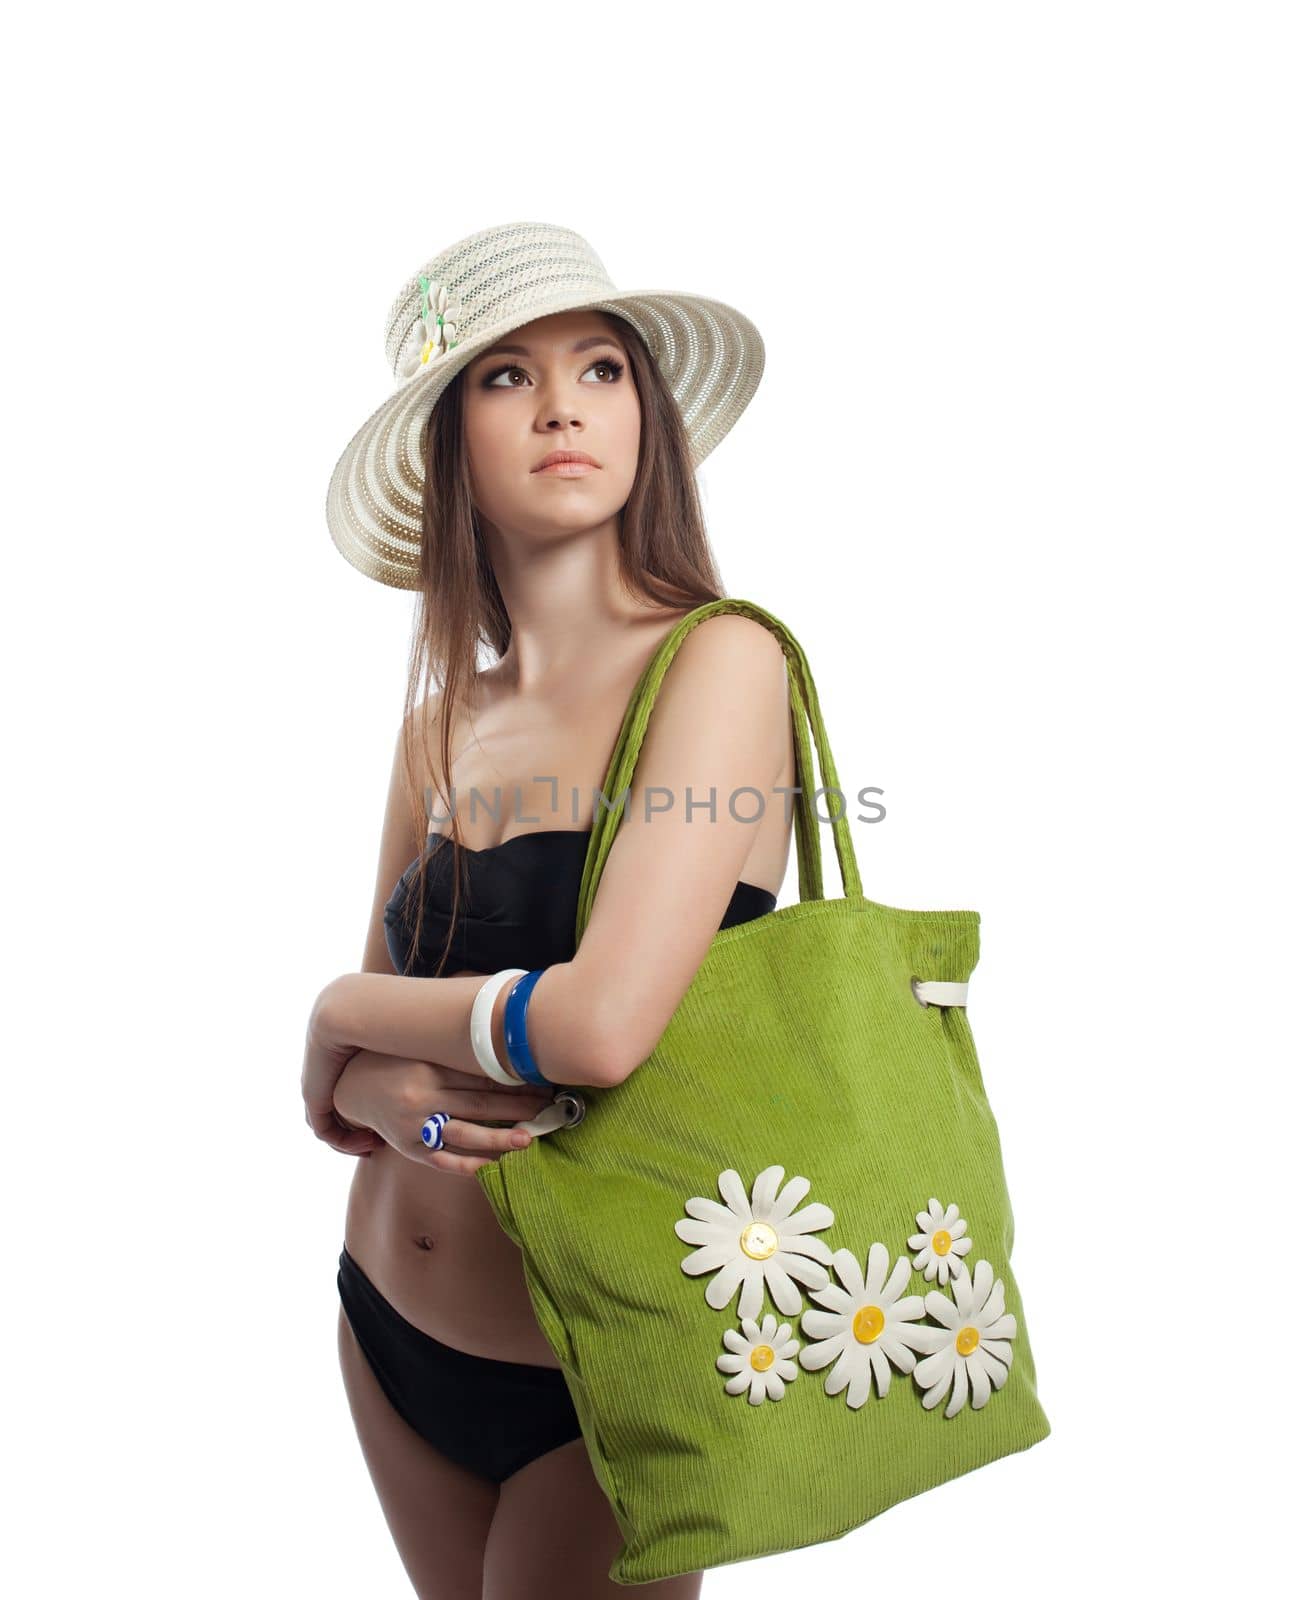 Yong woman posing with beach bag and straw hat isolated